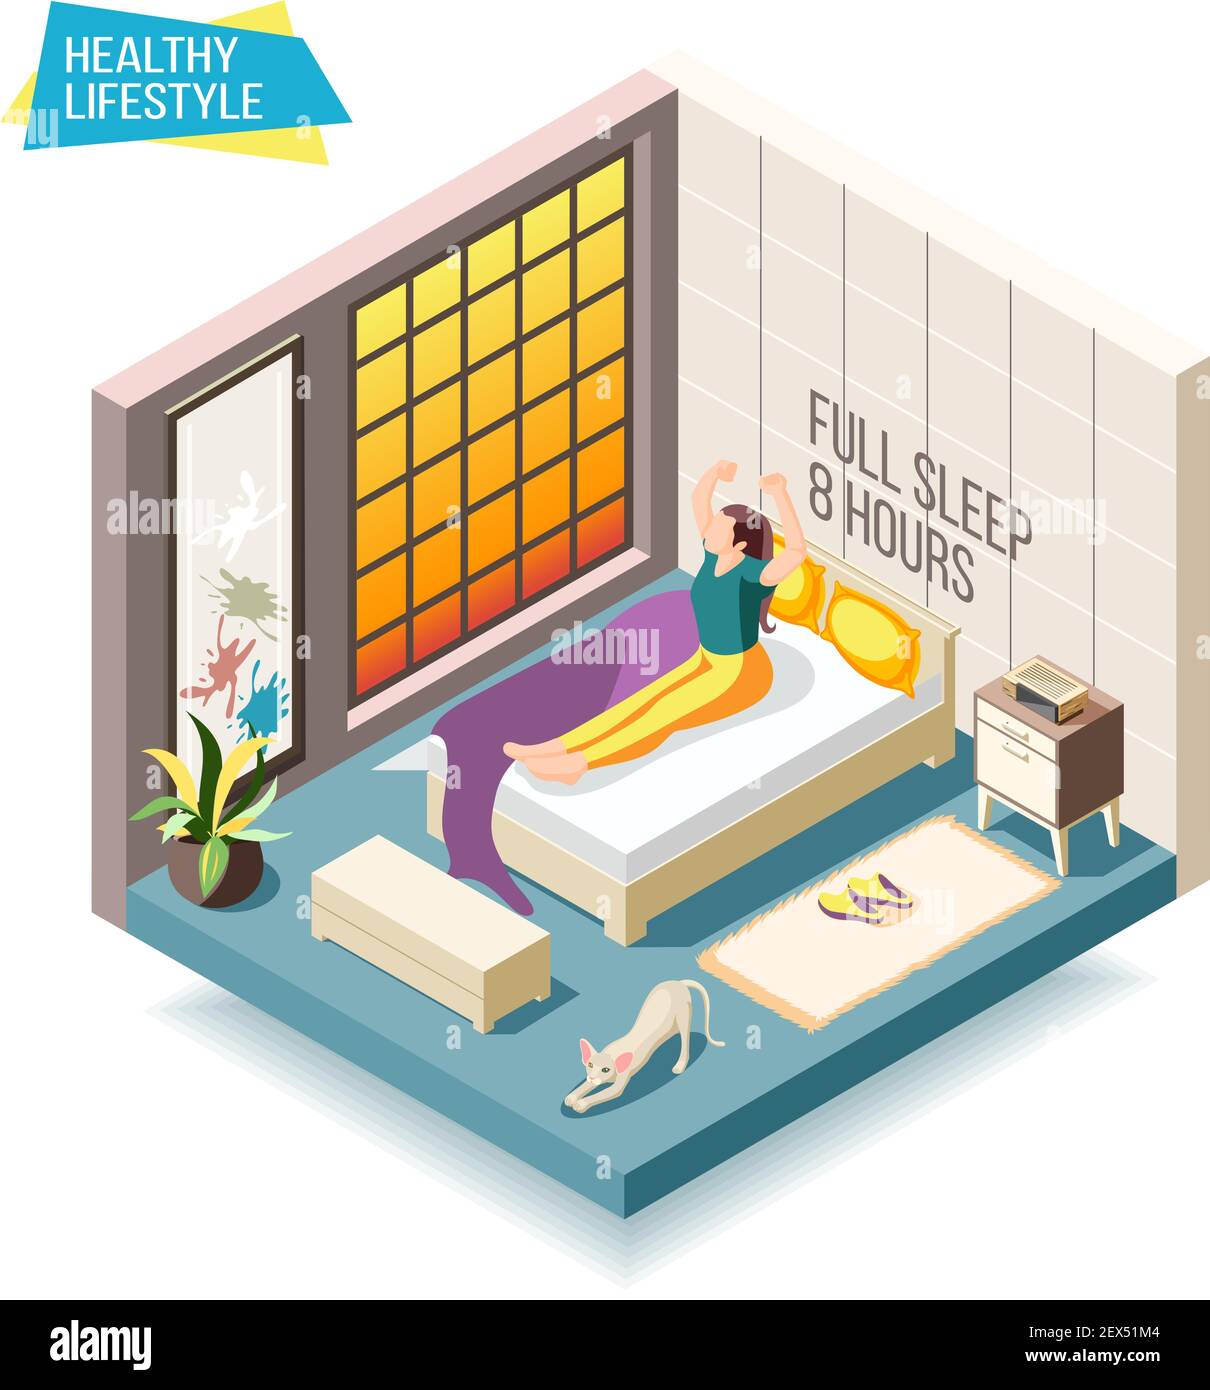 Healthy lifestyle isometric composition with woman waking up after eight hours of sleep vector illustration Stock Vector